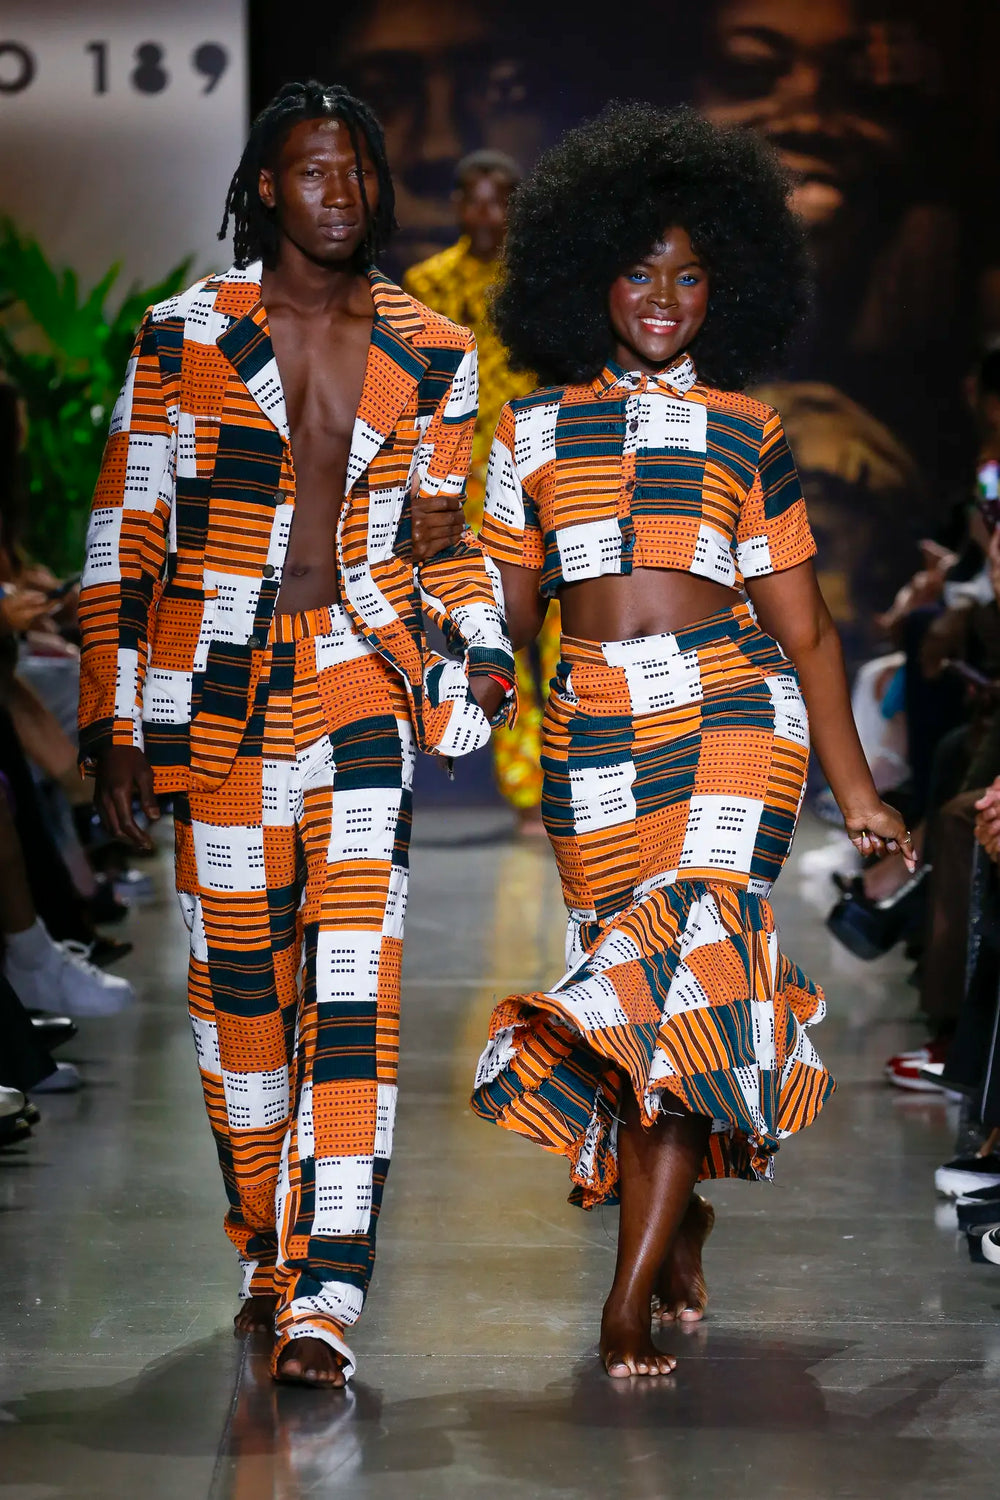 Ghana, Fashion, ​Africa, diaspora, cotton, dresses​, GOWNS, skirts, shirts, tops, womenswear, womens, Handmade, bag, West Africa, Gift, travel, vacation, beach, picnic, pool, swim, sand, family, trip, luxury, resort, spring, summer​, ​concert, gala, event, party, brunch, chic, ​custom, bespoke, plus-sized, extended sizes, inclusivity, celebration, special, cotton, packable, luxury, accessible, new, novelty, classic